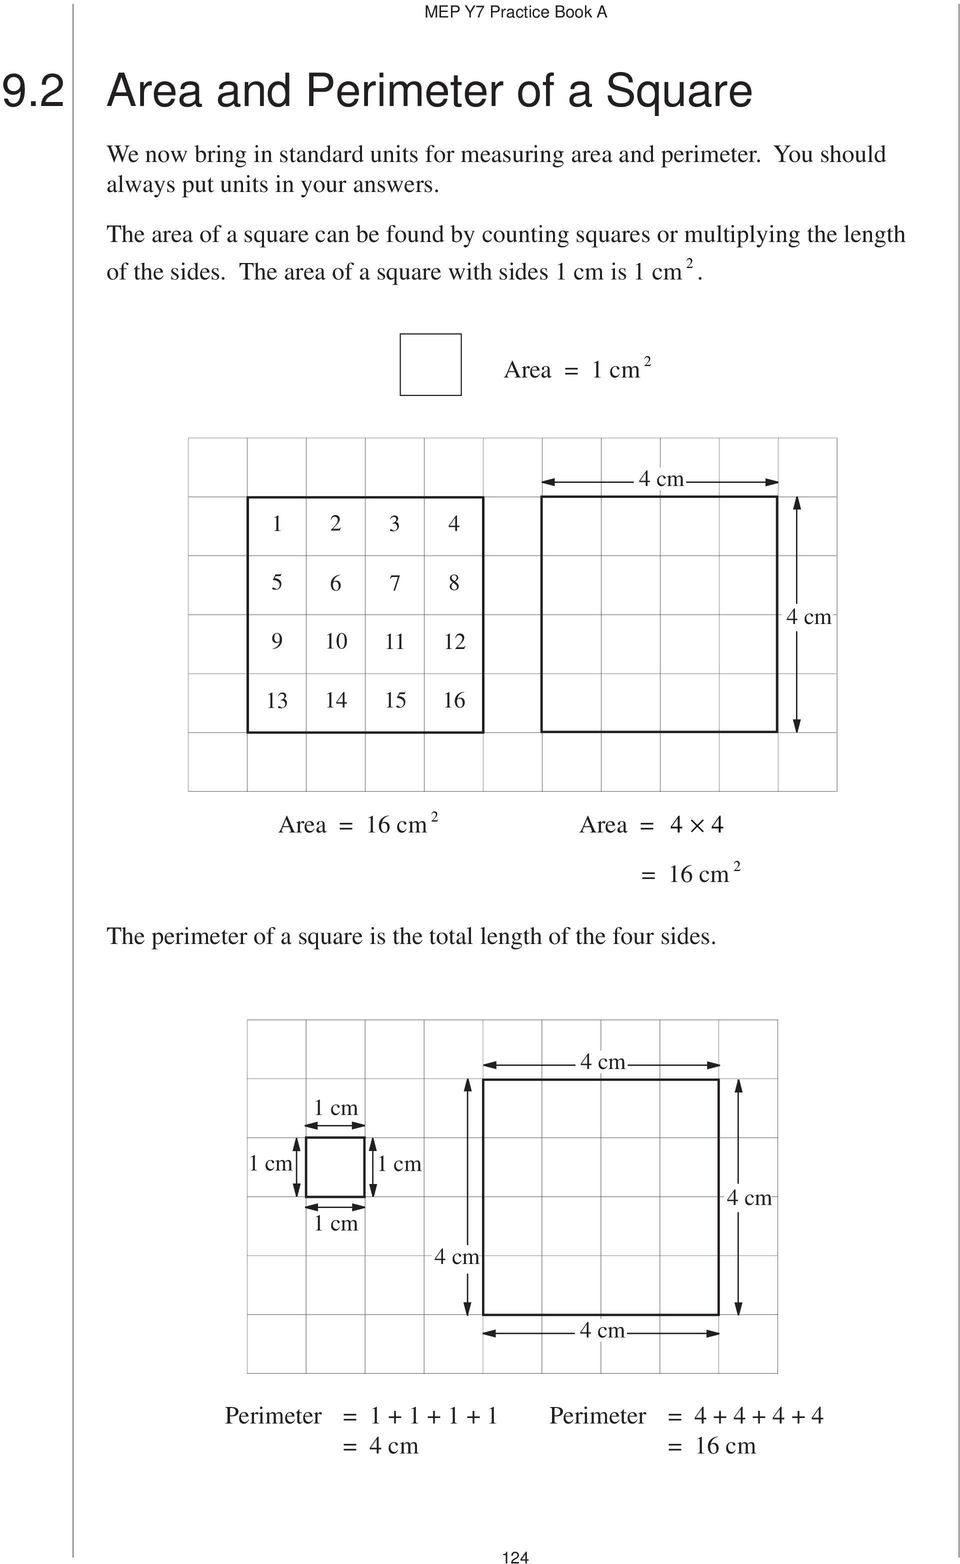 The area of a square can be found by counting squares or multiplying the length of the sides.